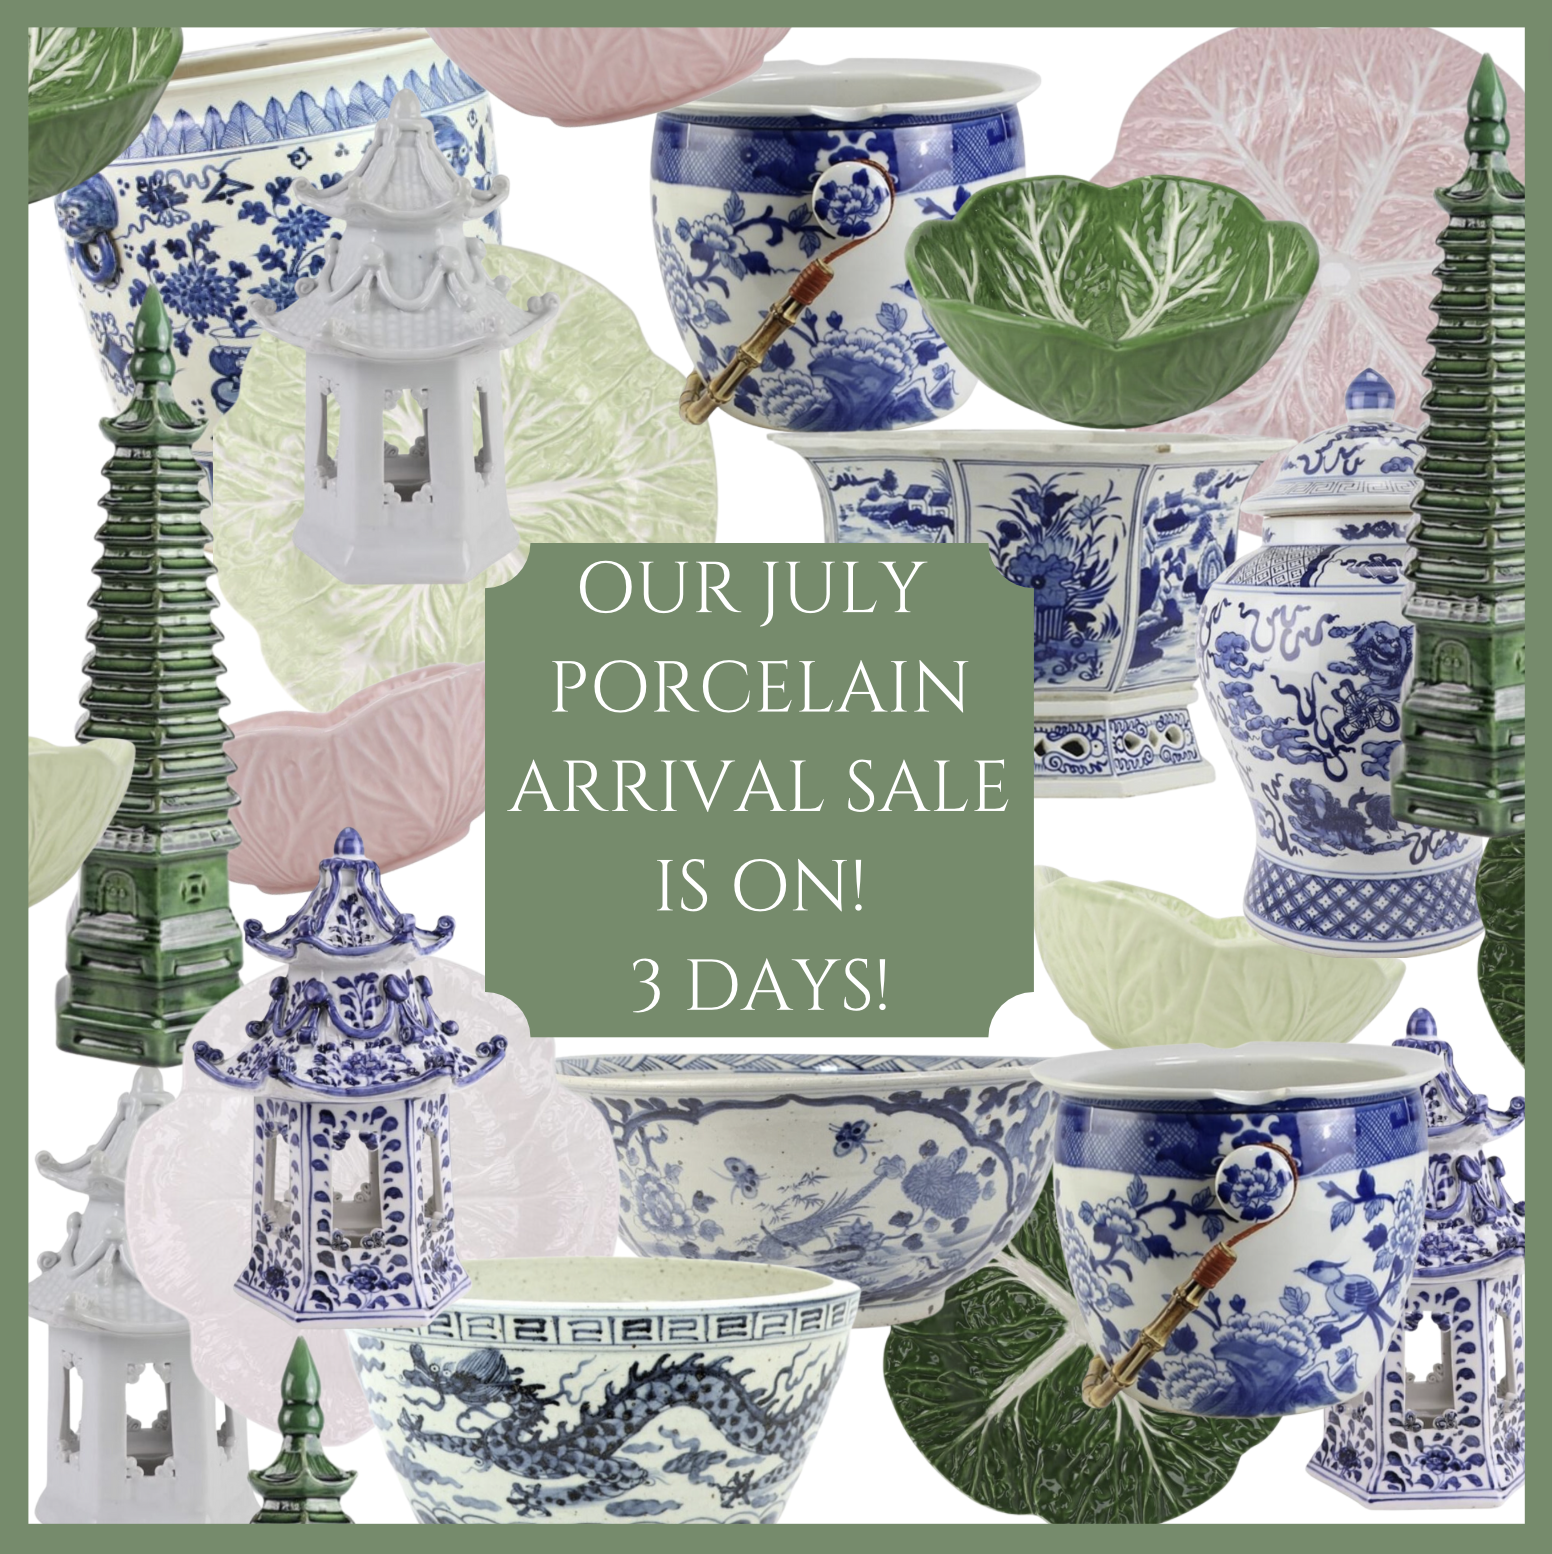 Our porcelain arrival sale is on and ready to ship!